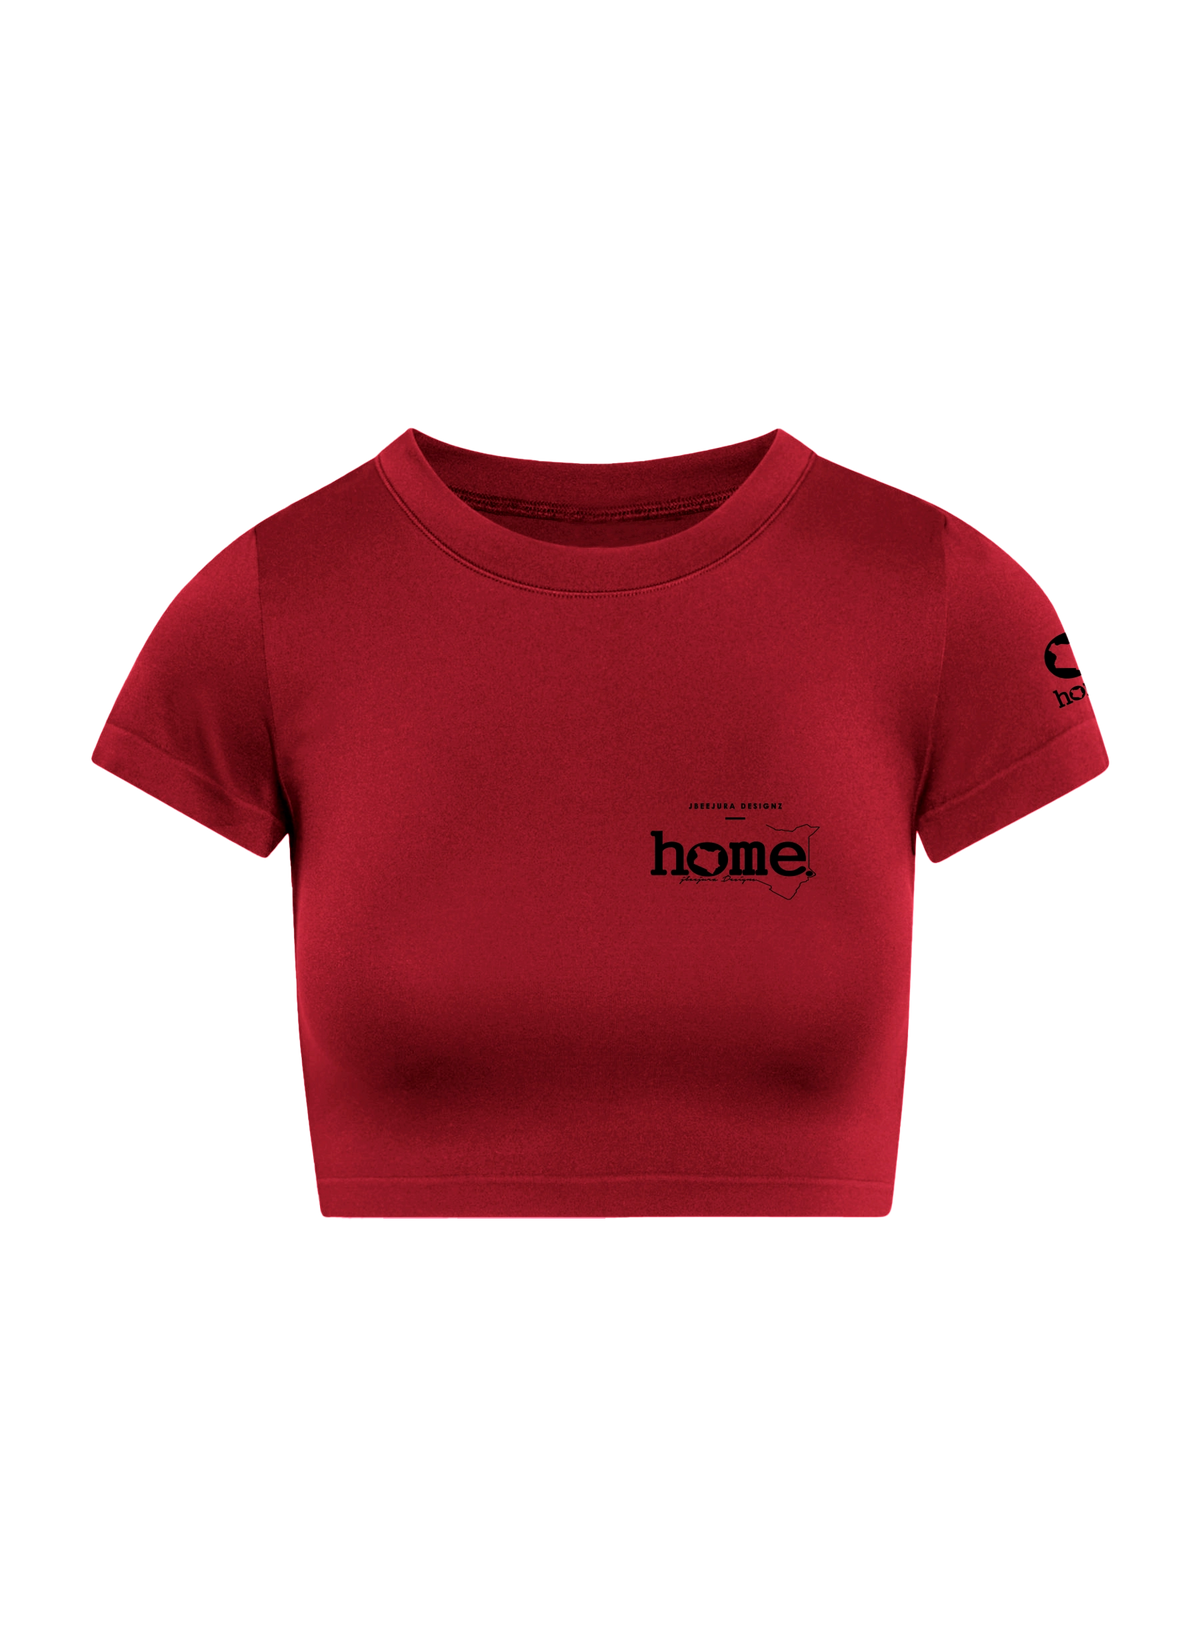 home_254 SHORT SLEEVED MAROON RED CROPPED ARIA TEE WITH A BLACK 3D WORDS PRINT – COTTON PLUS FABRIC